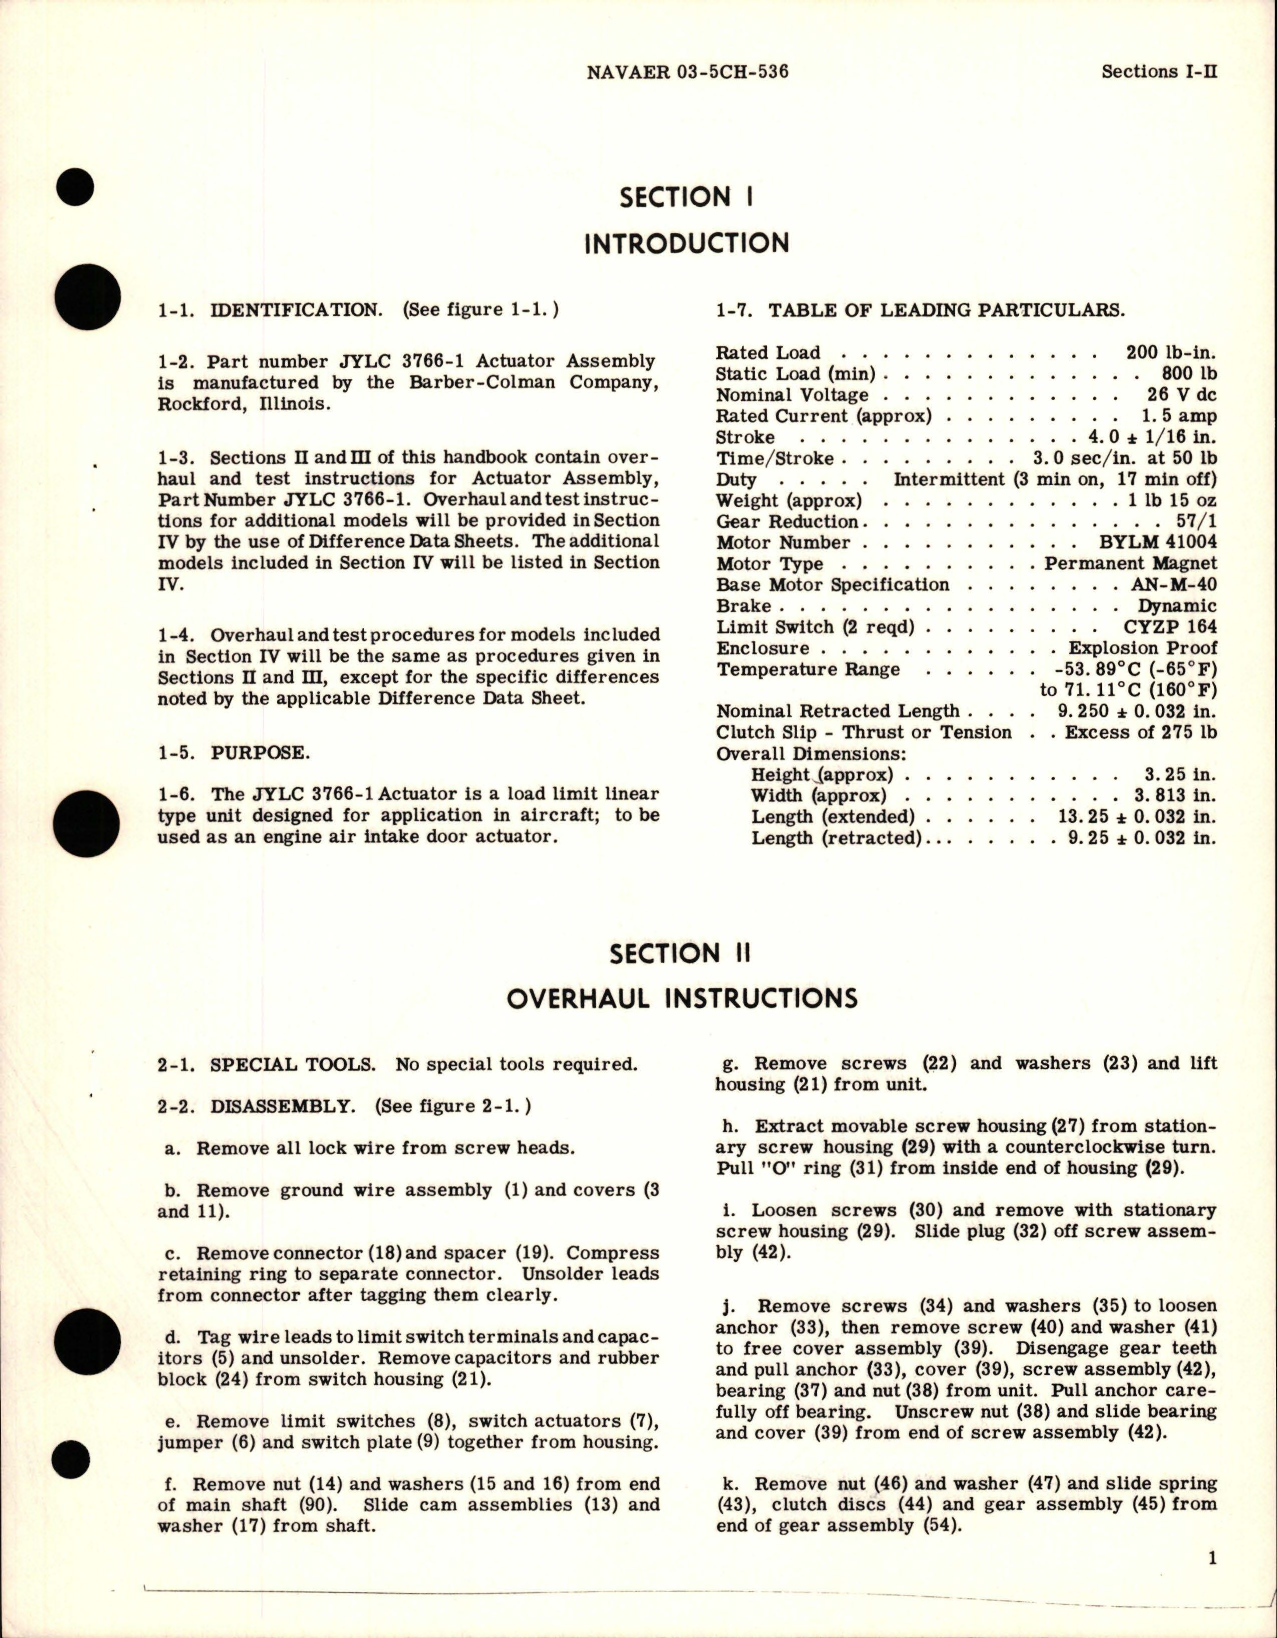 Sample page 5 from AirCorps Library document: Overhaul Instructions for Linear Electro-Mechanical Actuator - Model JYLC 3766-1